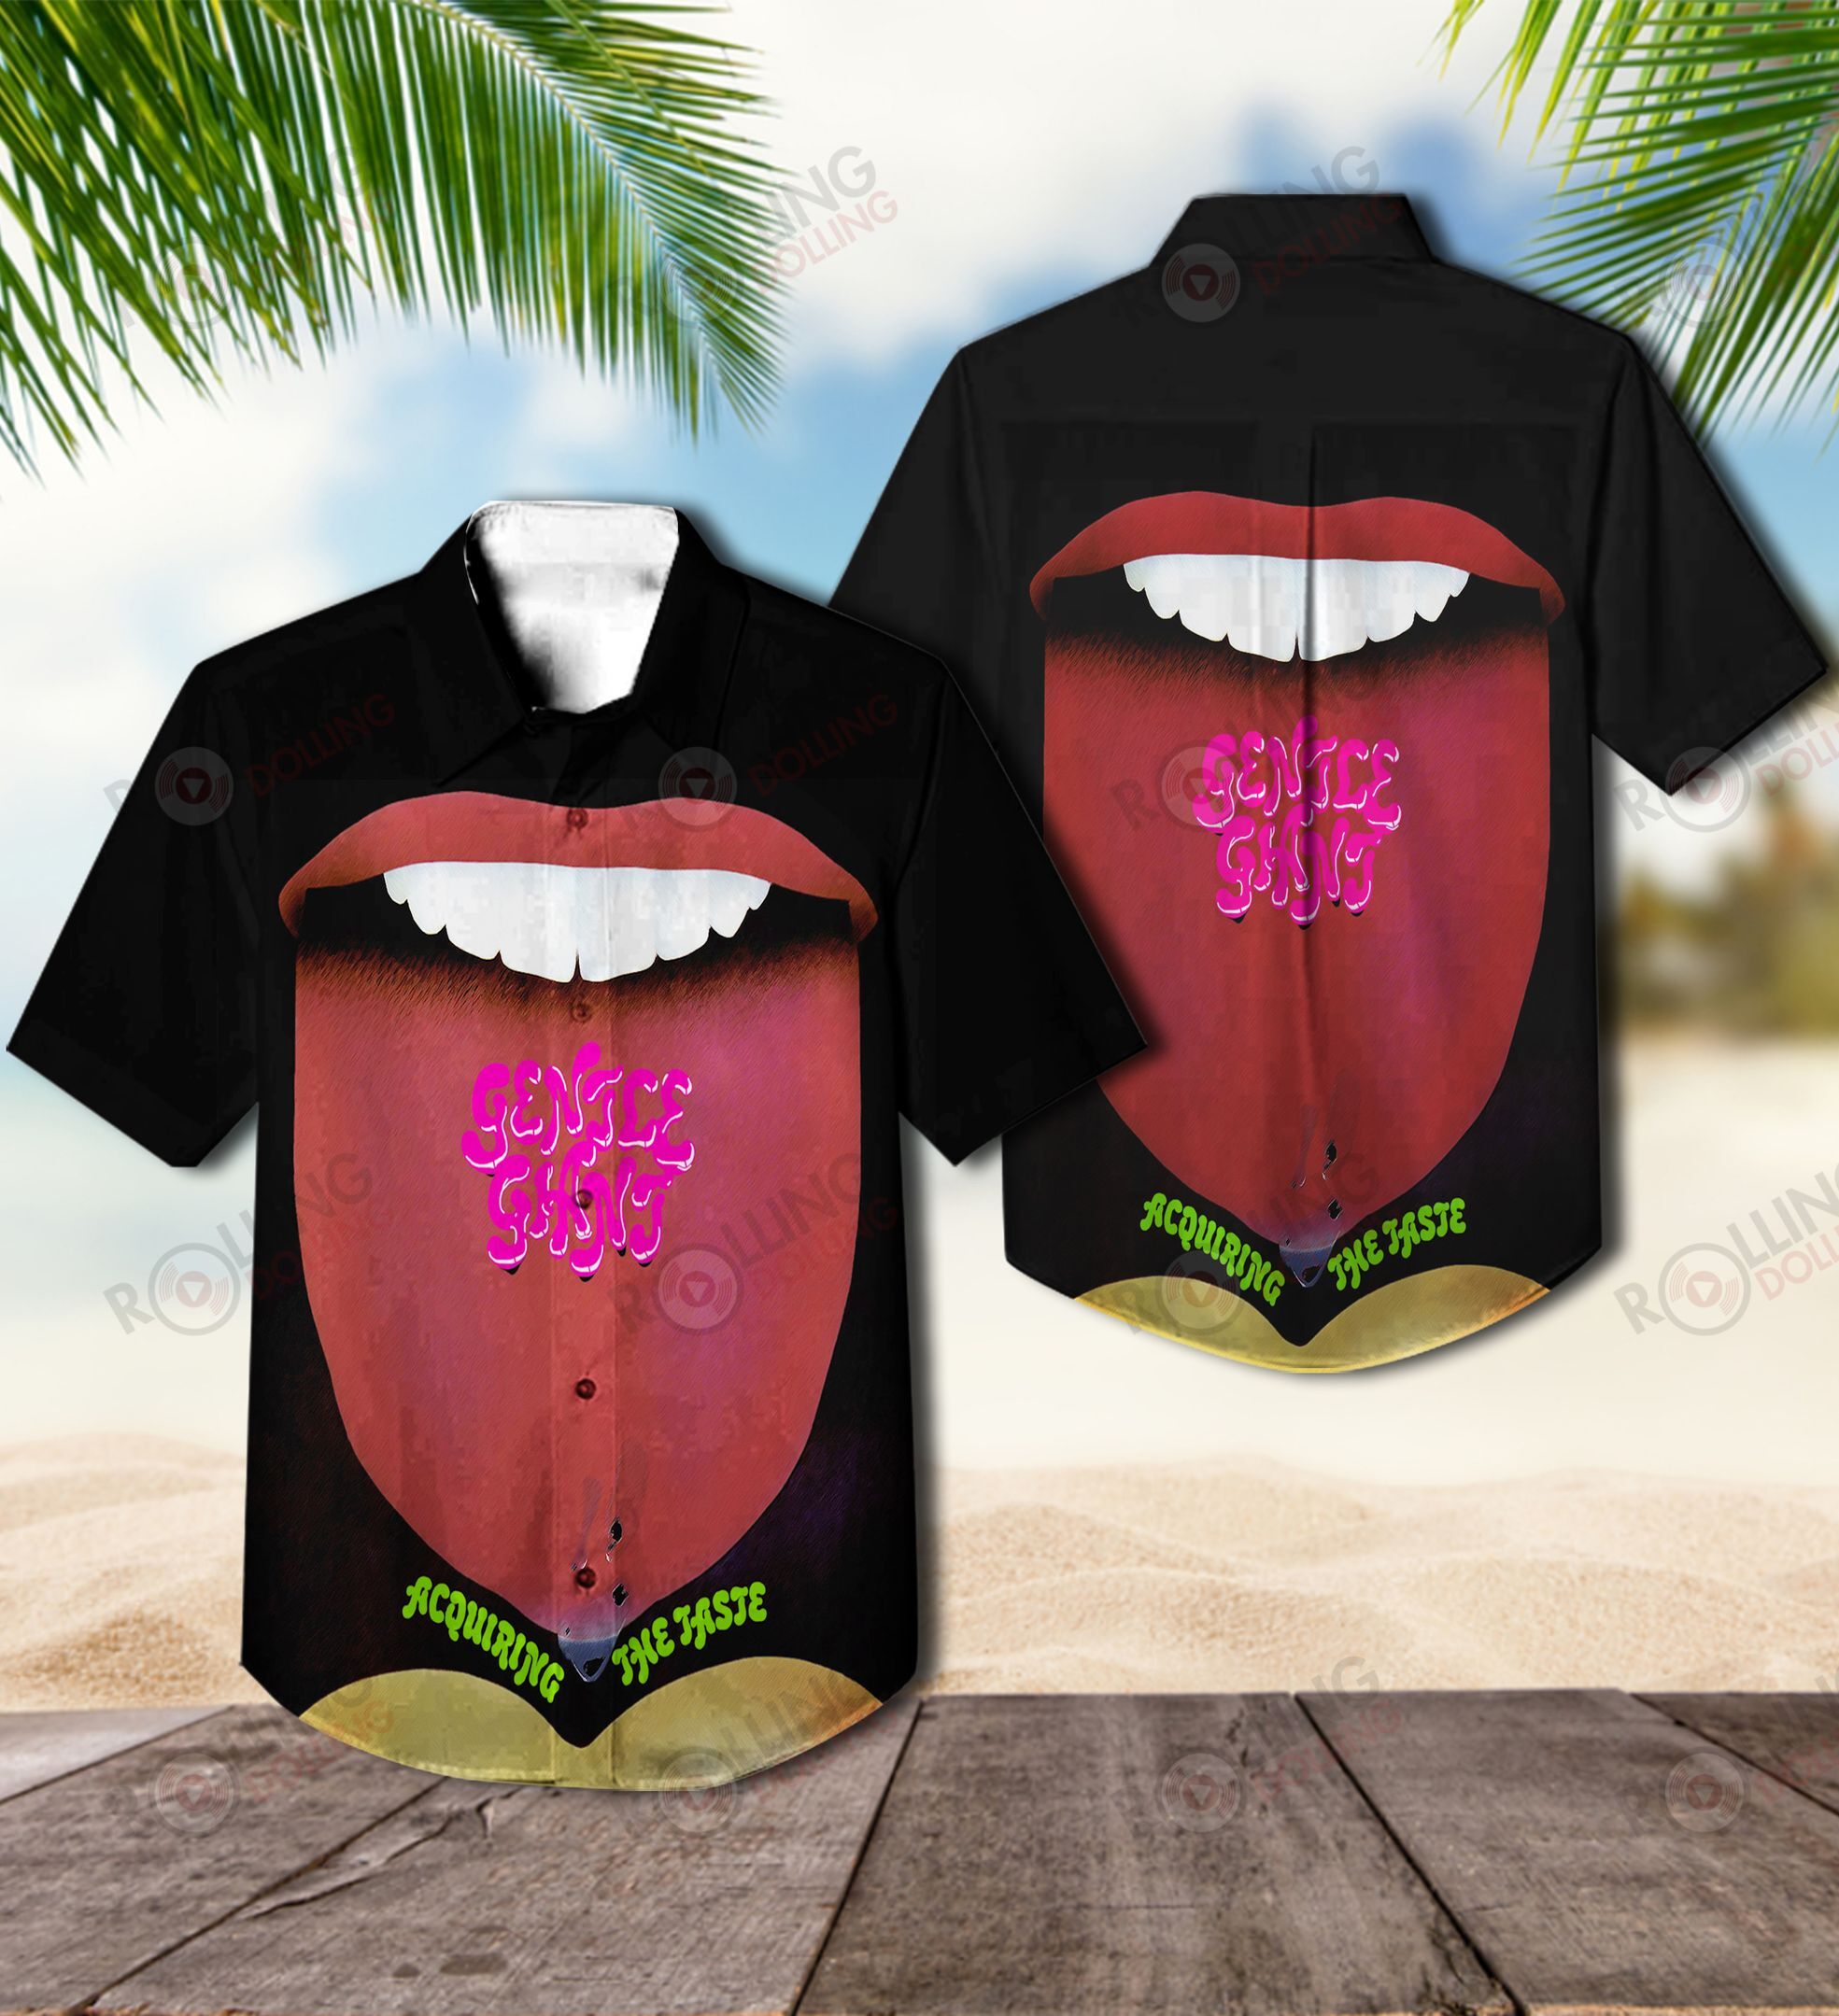 This would make a great gift for any fan who loves Hawaiian Shirt as well as Rock band 99